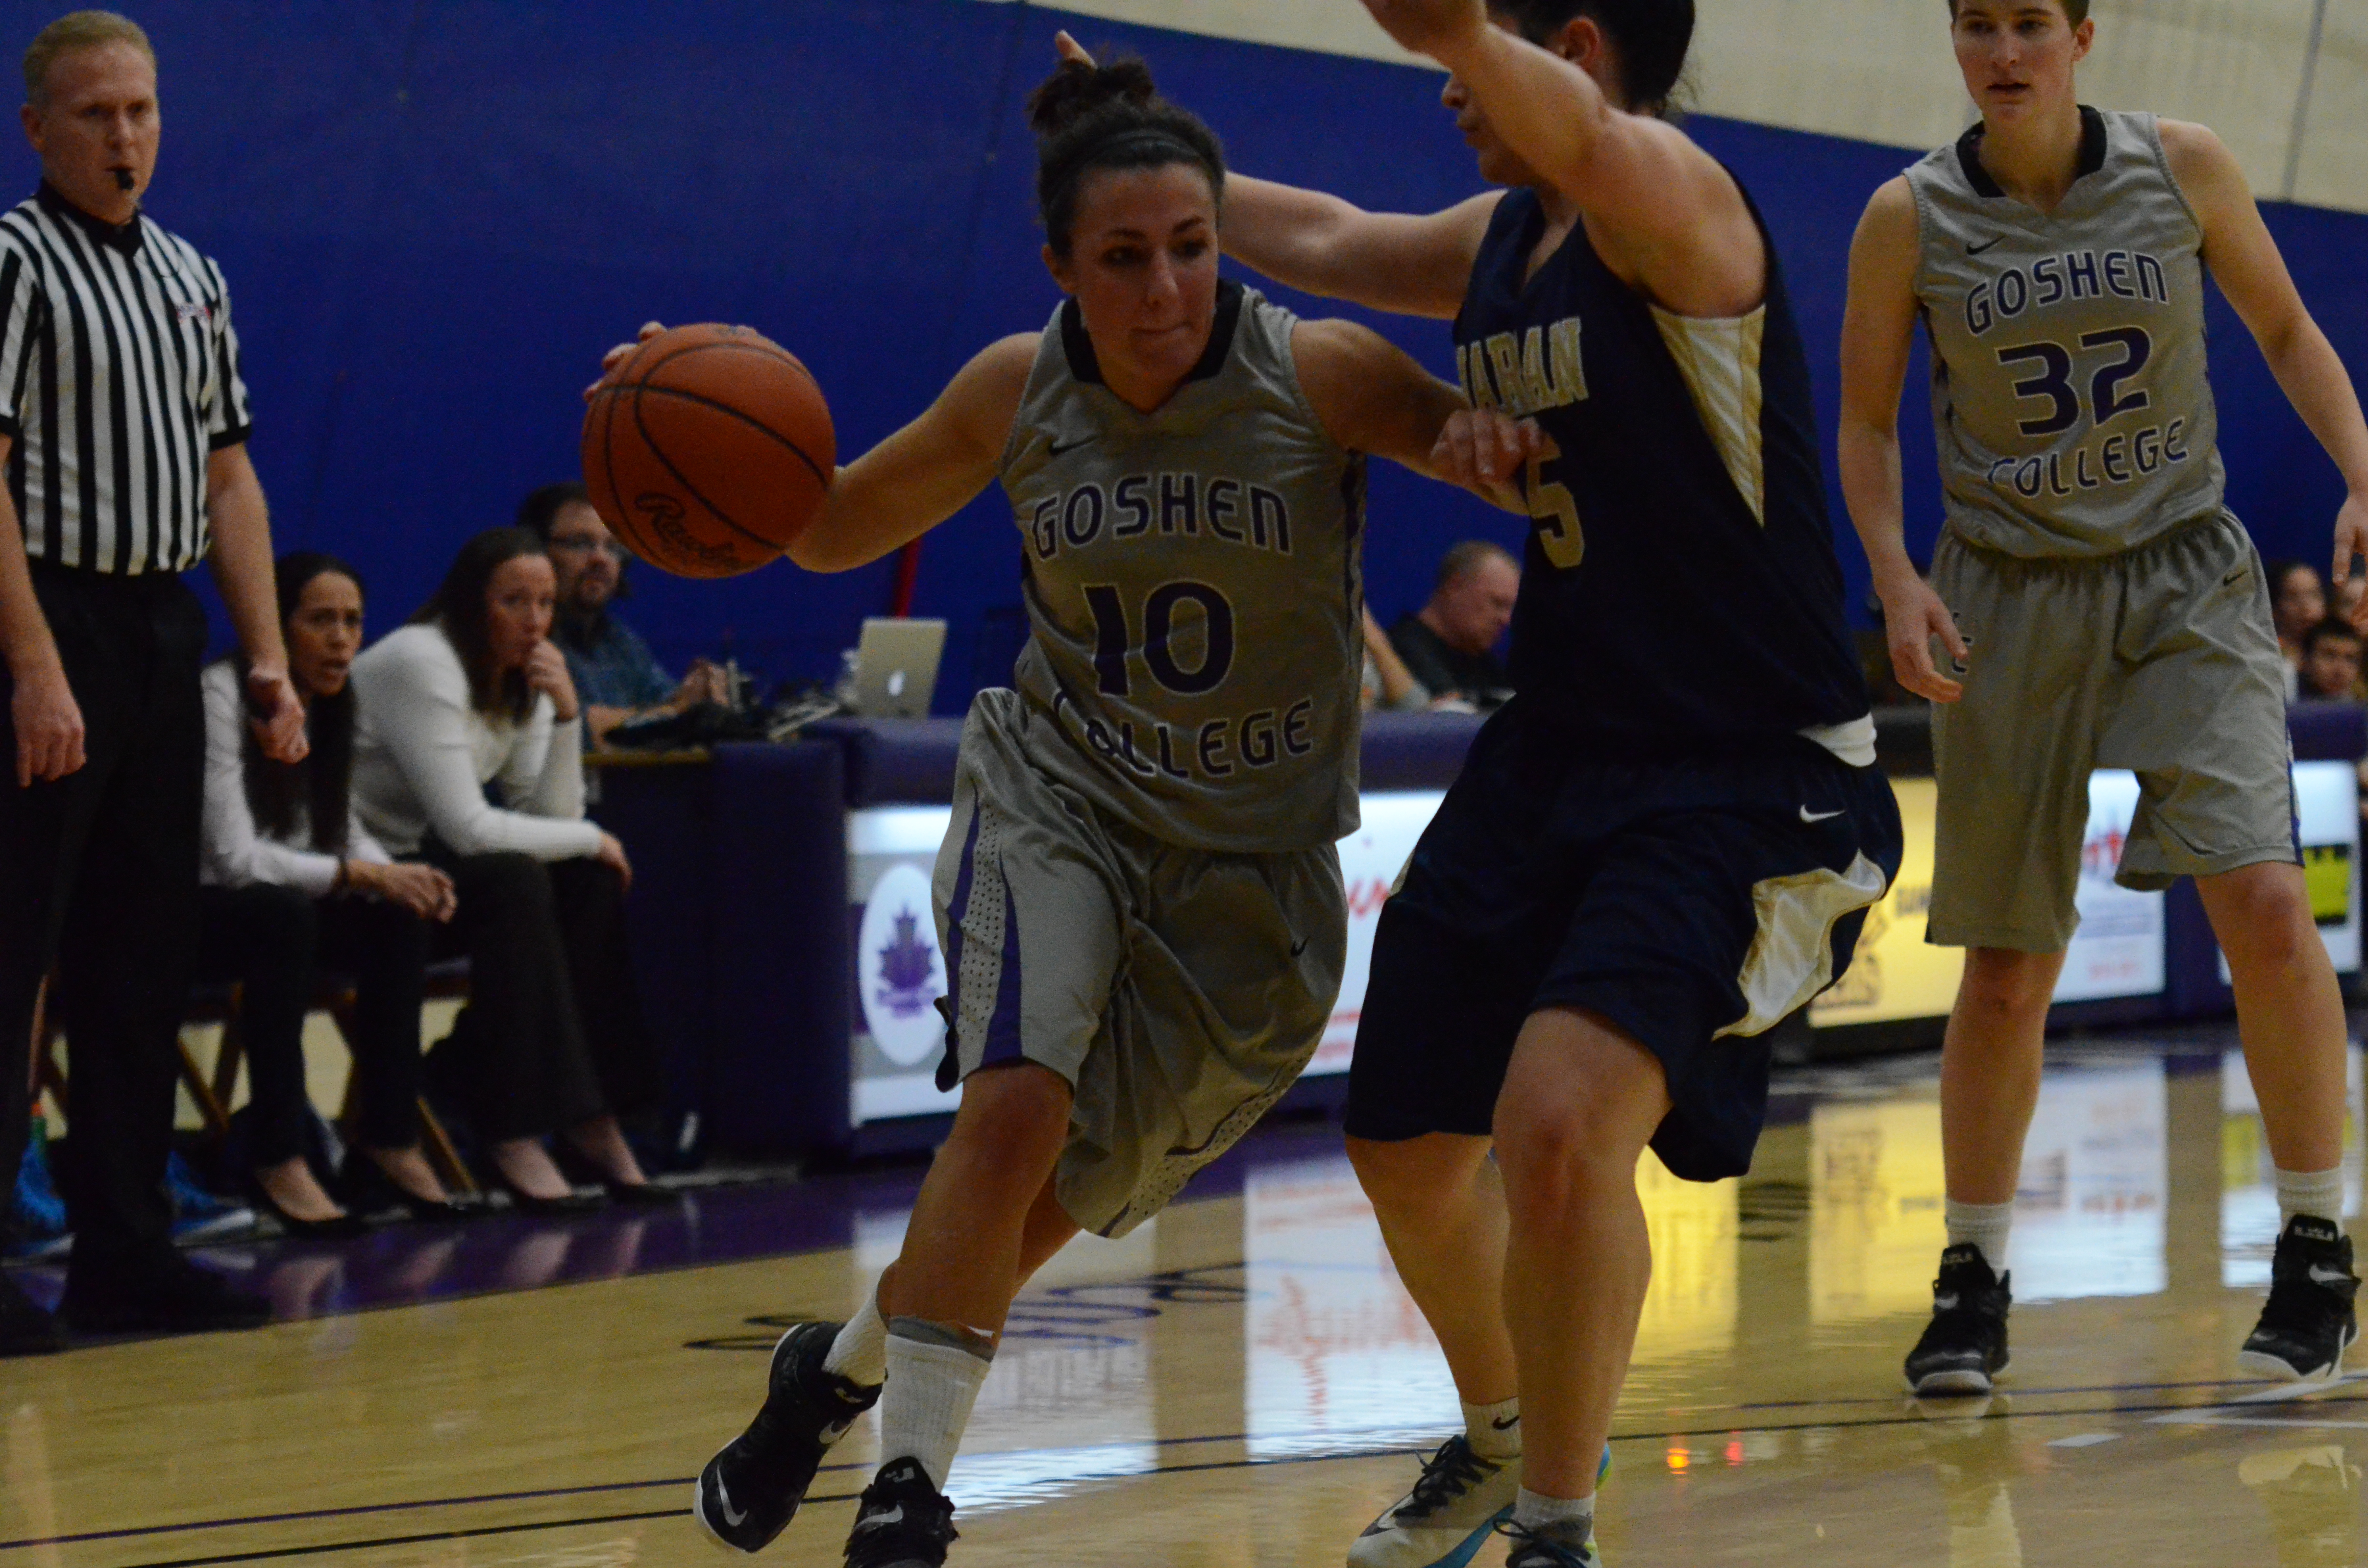 Avery Bishoff dribbles the ball around an opposing player during a game